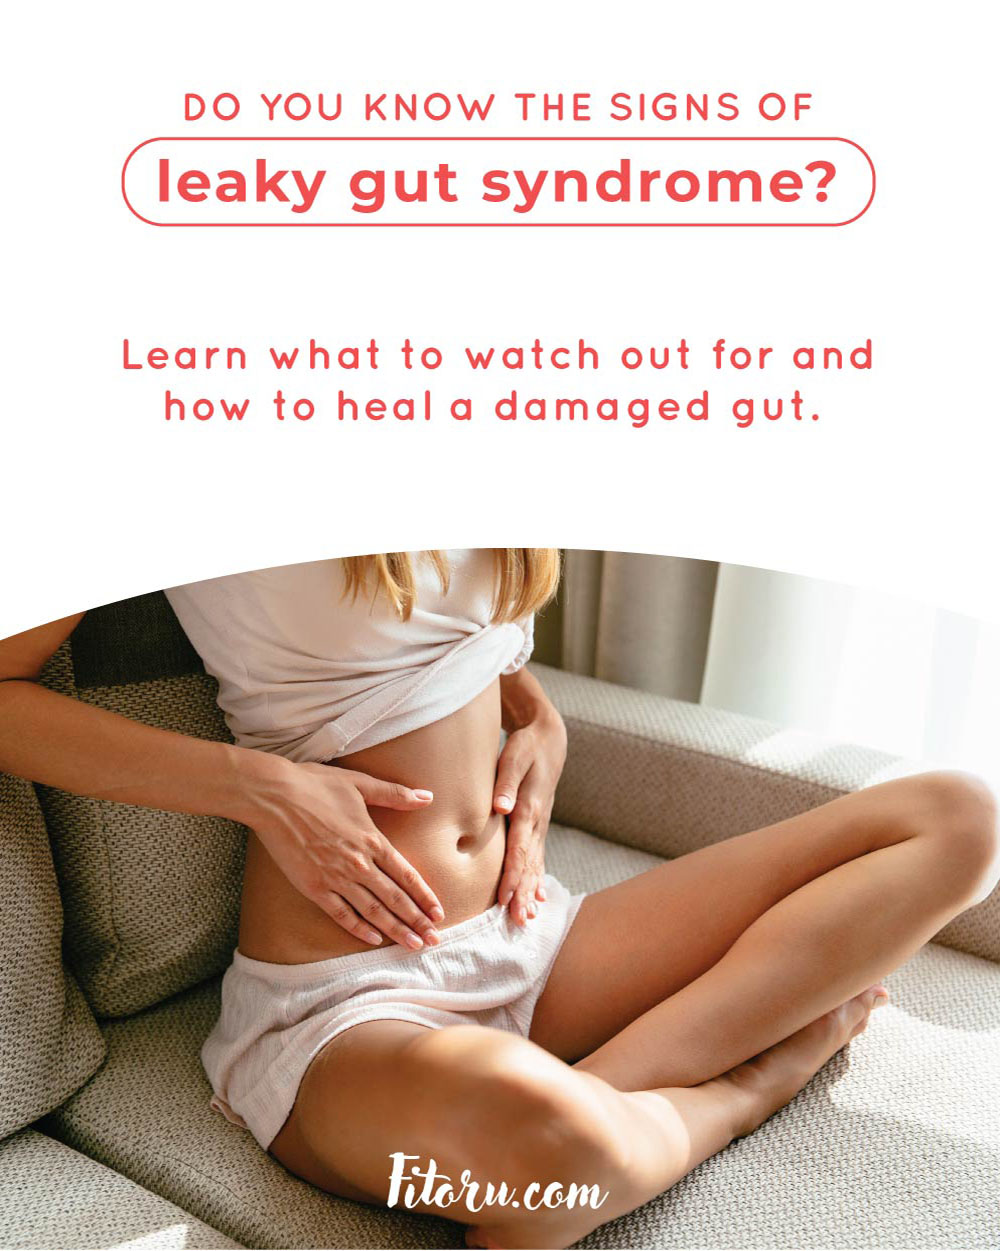 Do you know the signs of leaky gut syndrome? Learn what to watch out for and how to heal a damaged gut.